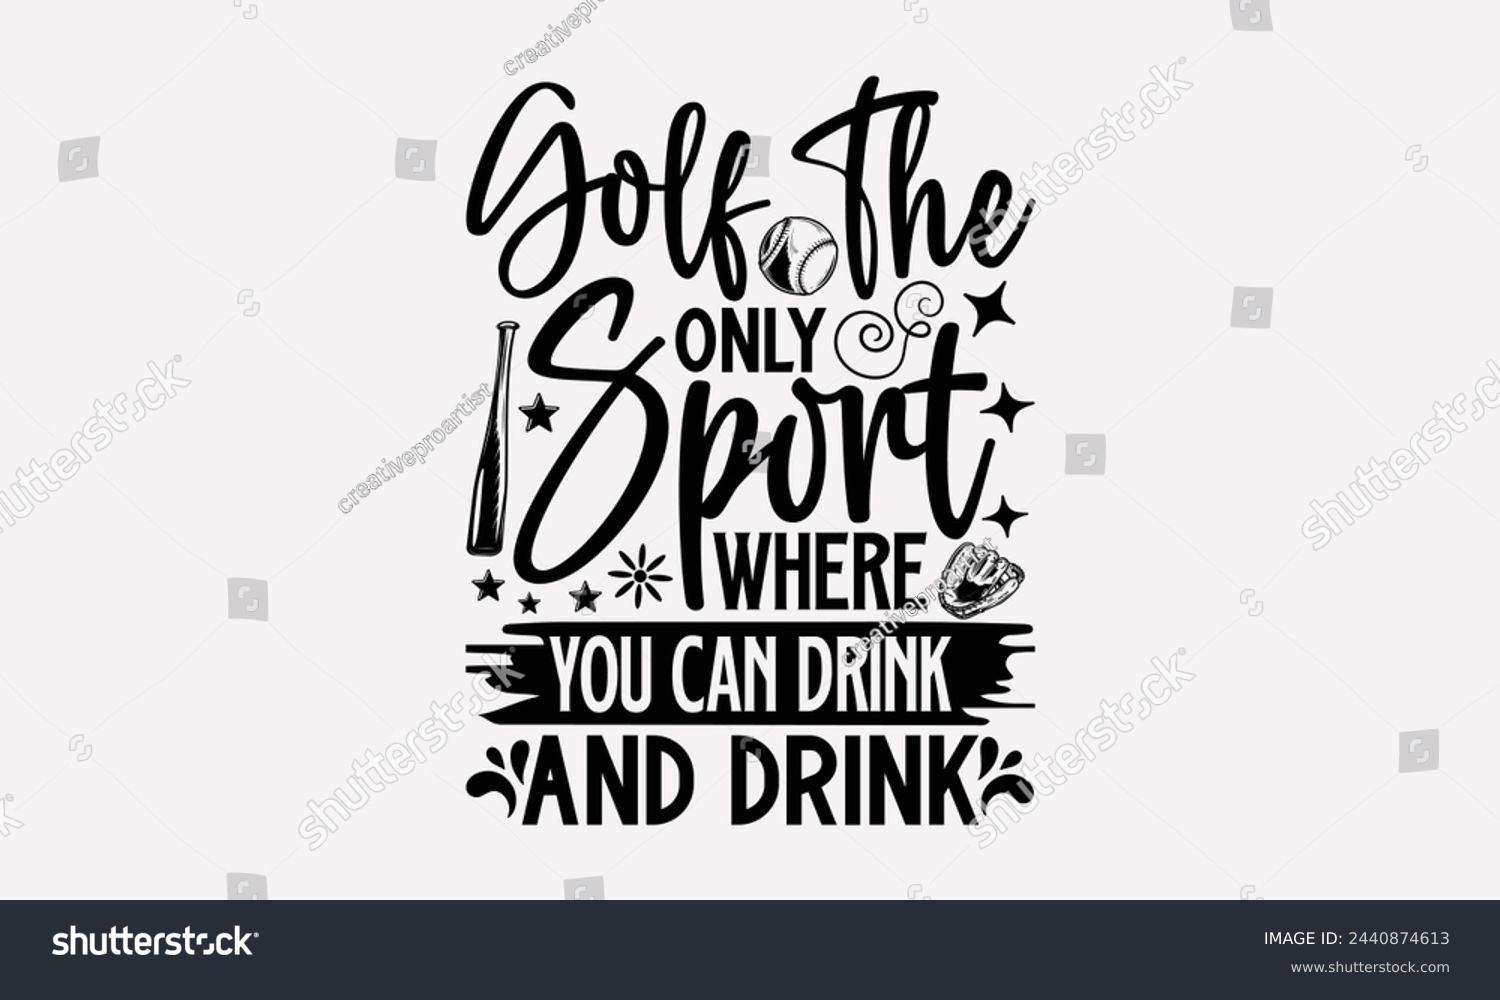 SVG of Golf The Only Sport Where You Can Drink And Drink- Golf t- shirt design, Hand drawn lettering phrase isolated on white background, for Cutting Machine, Silhouette Cameo, Cricut, greeting card template svg